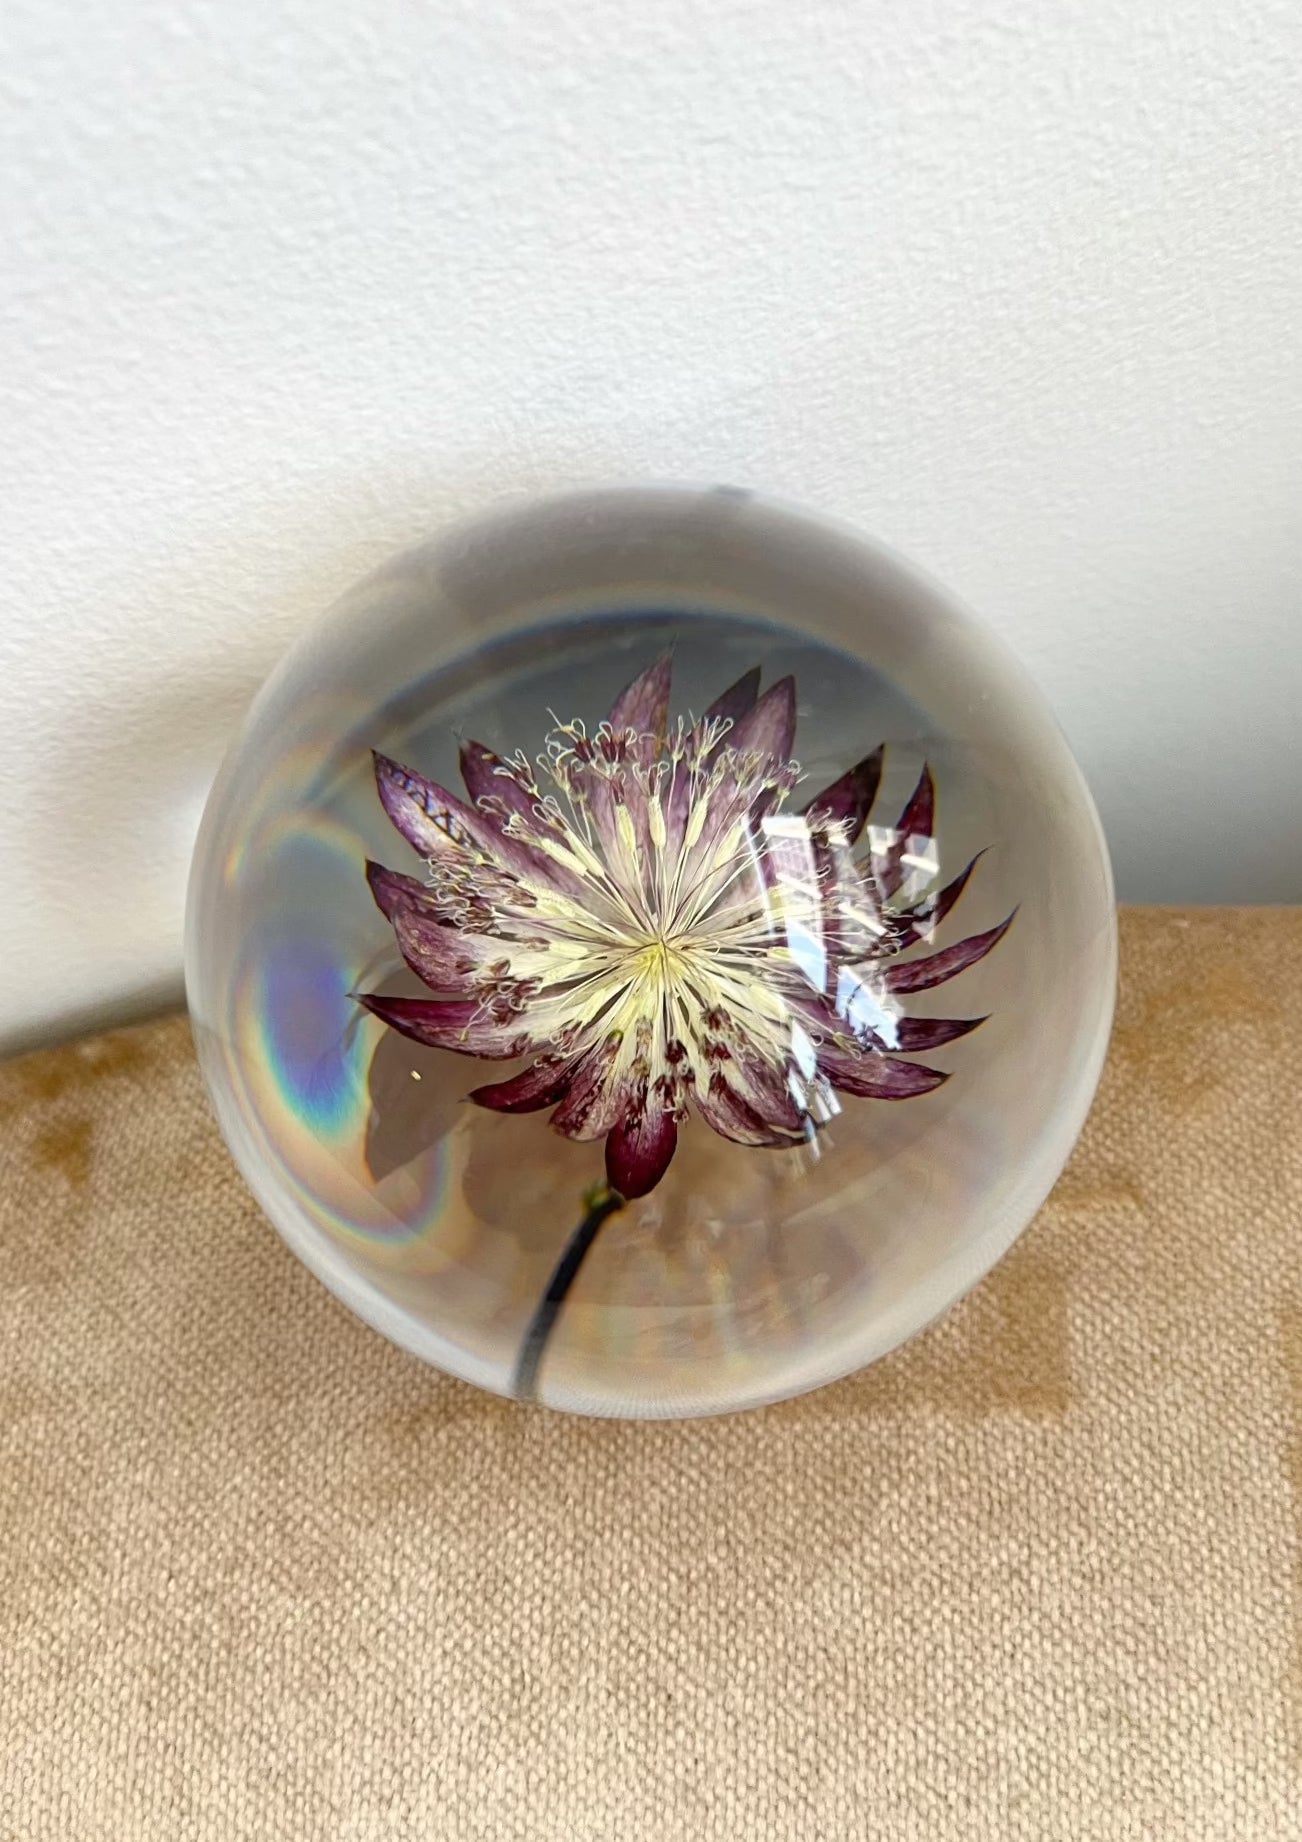 A delightful blooming passiflora lives inside a crystal sphere.